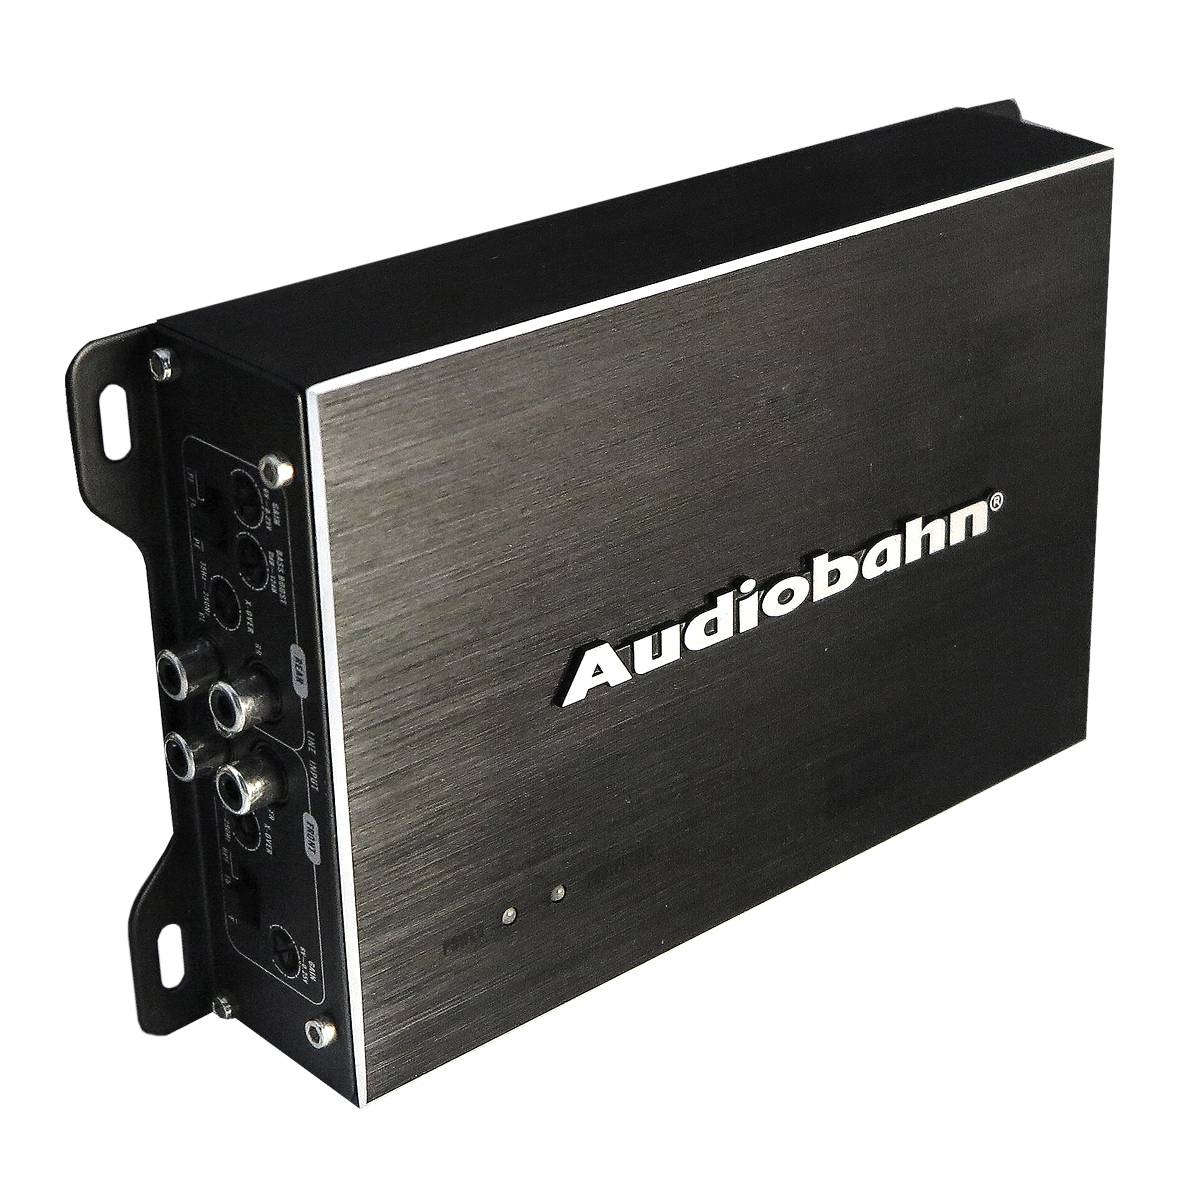 Amplificador 4 canales clase “D” – COMPACT-4 – Audiobahn